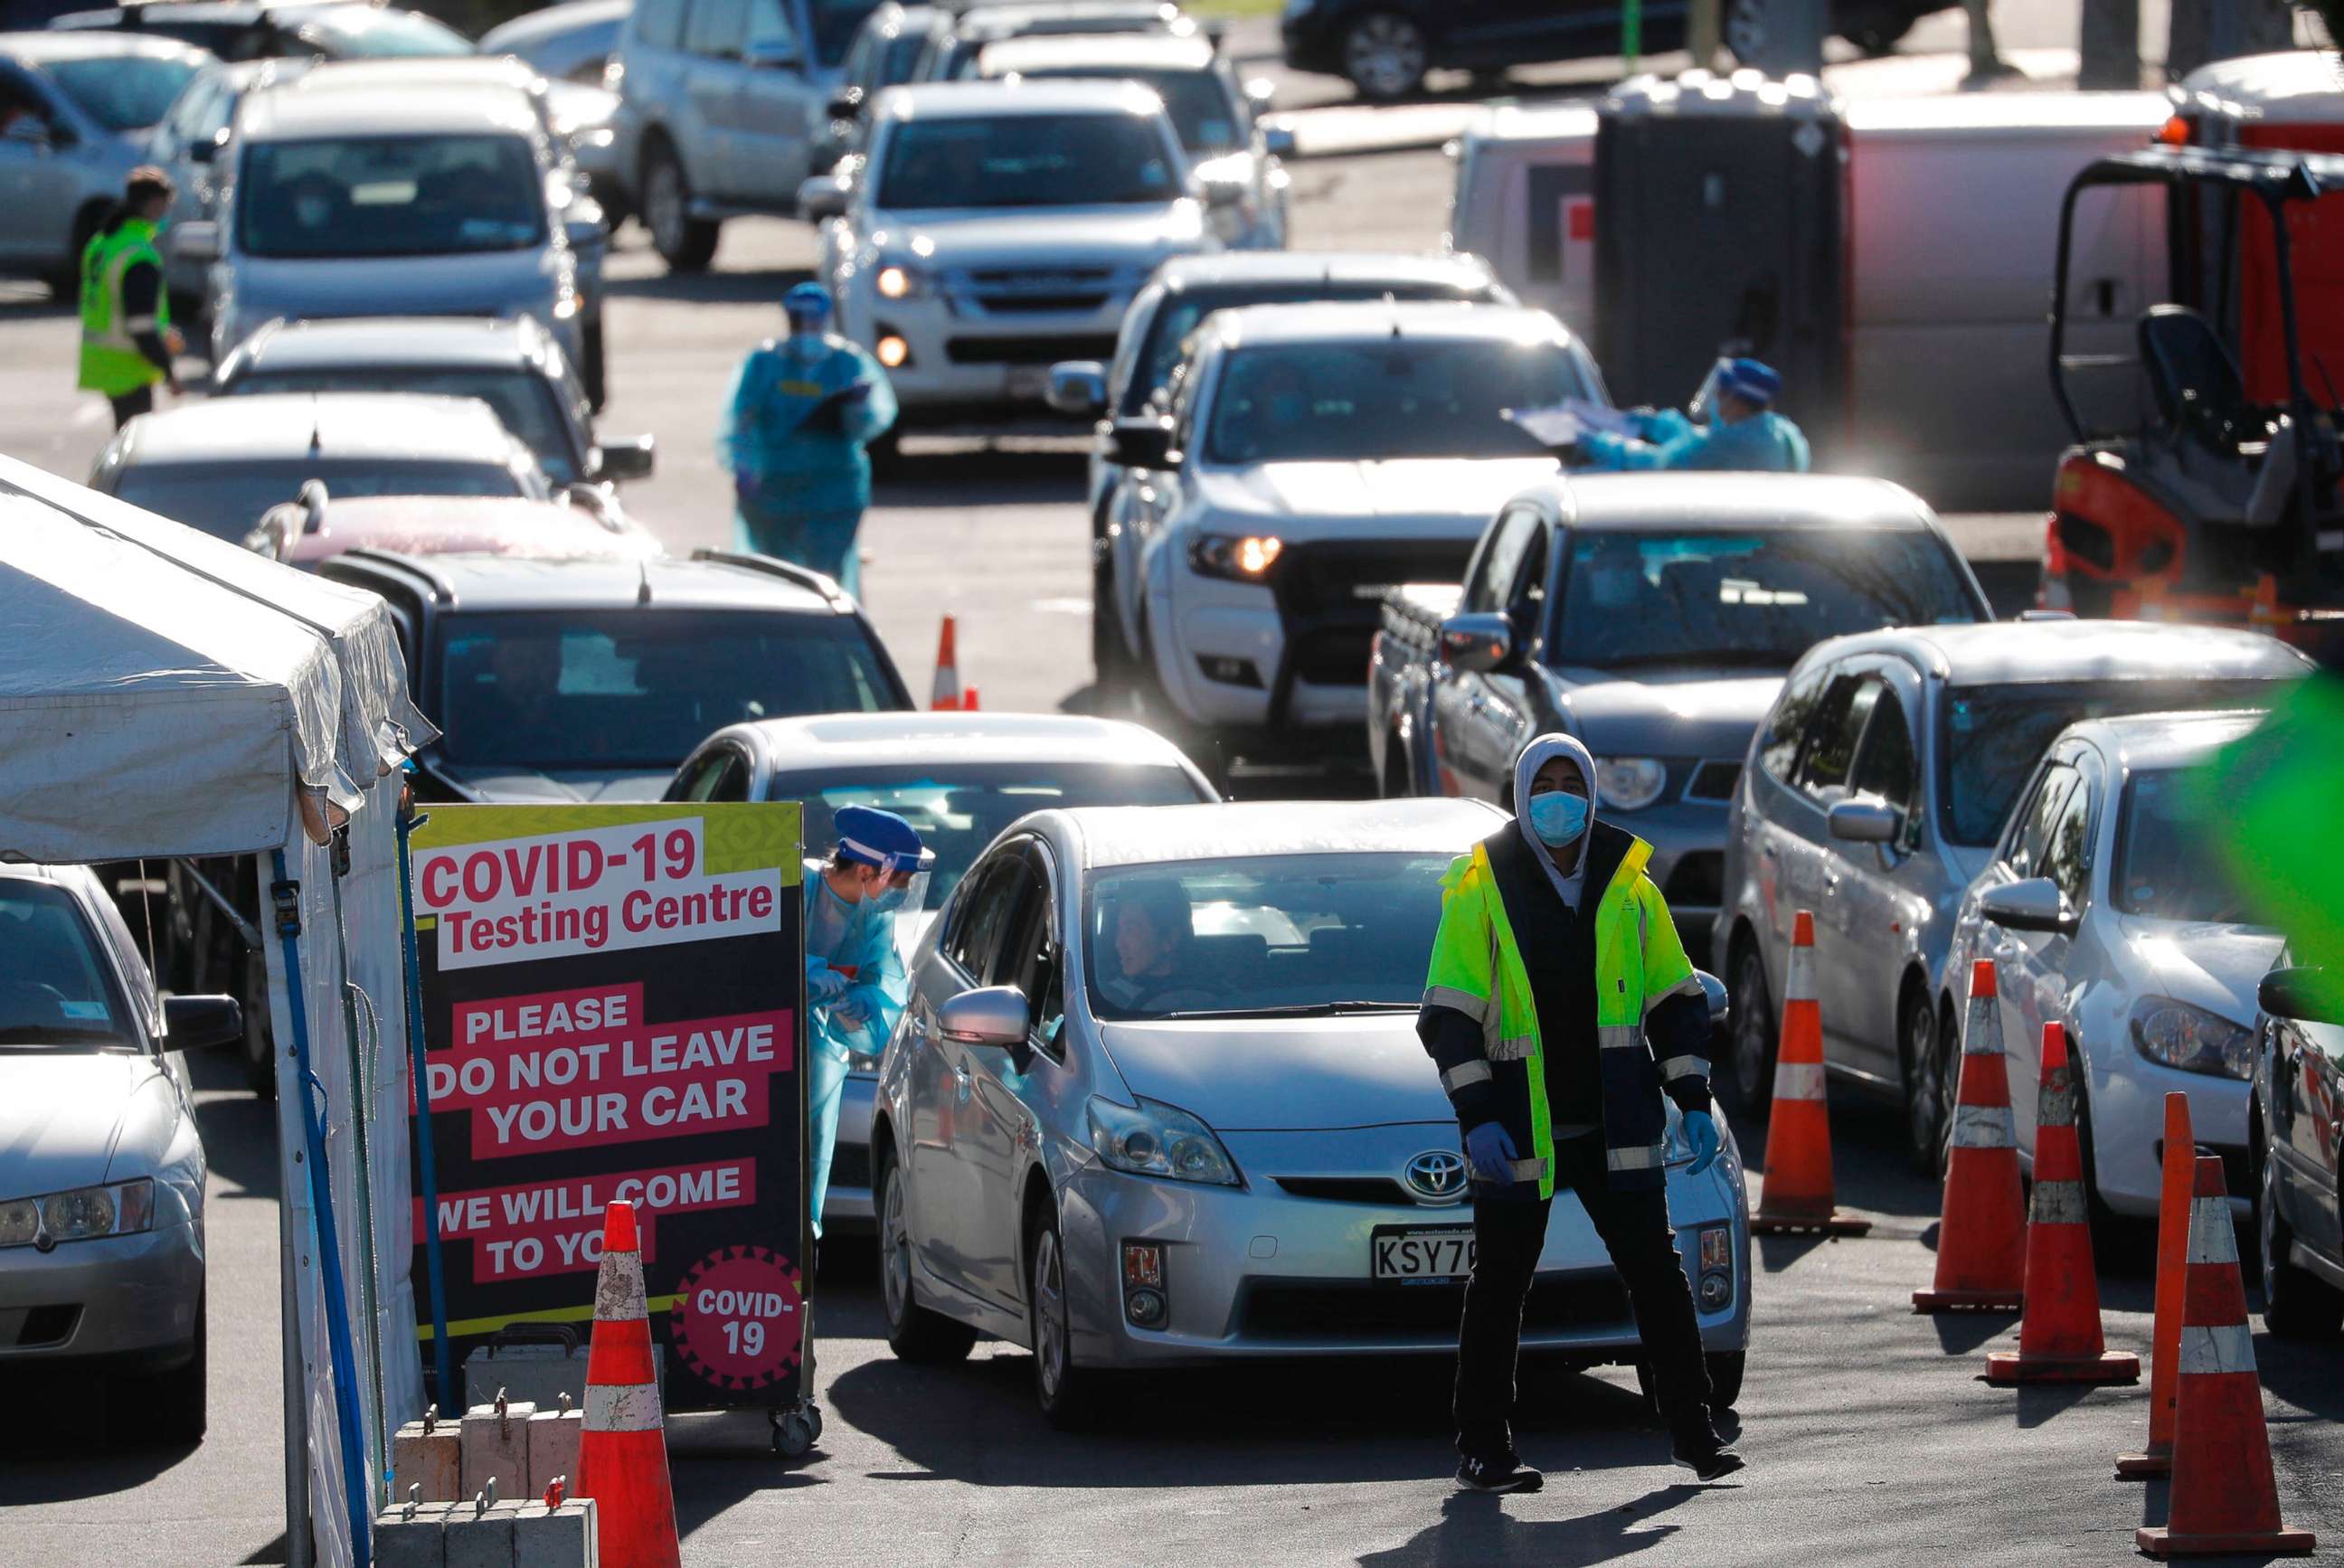 PHOTO: Cars queue at a COVID-19 test center in Auckland, Aug. 13, 2020. Health authorities in New Zealand are scrambling to trace the source of a new outbreak of the coronavirus as the nation's largest city goes back into lockdown.